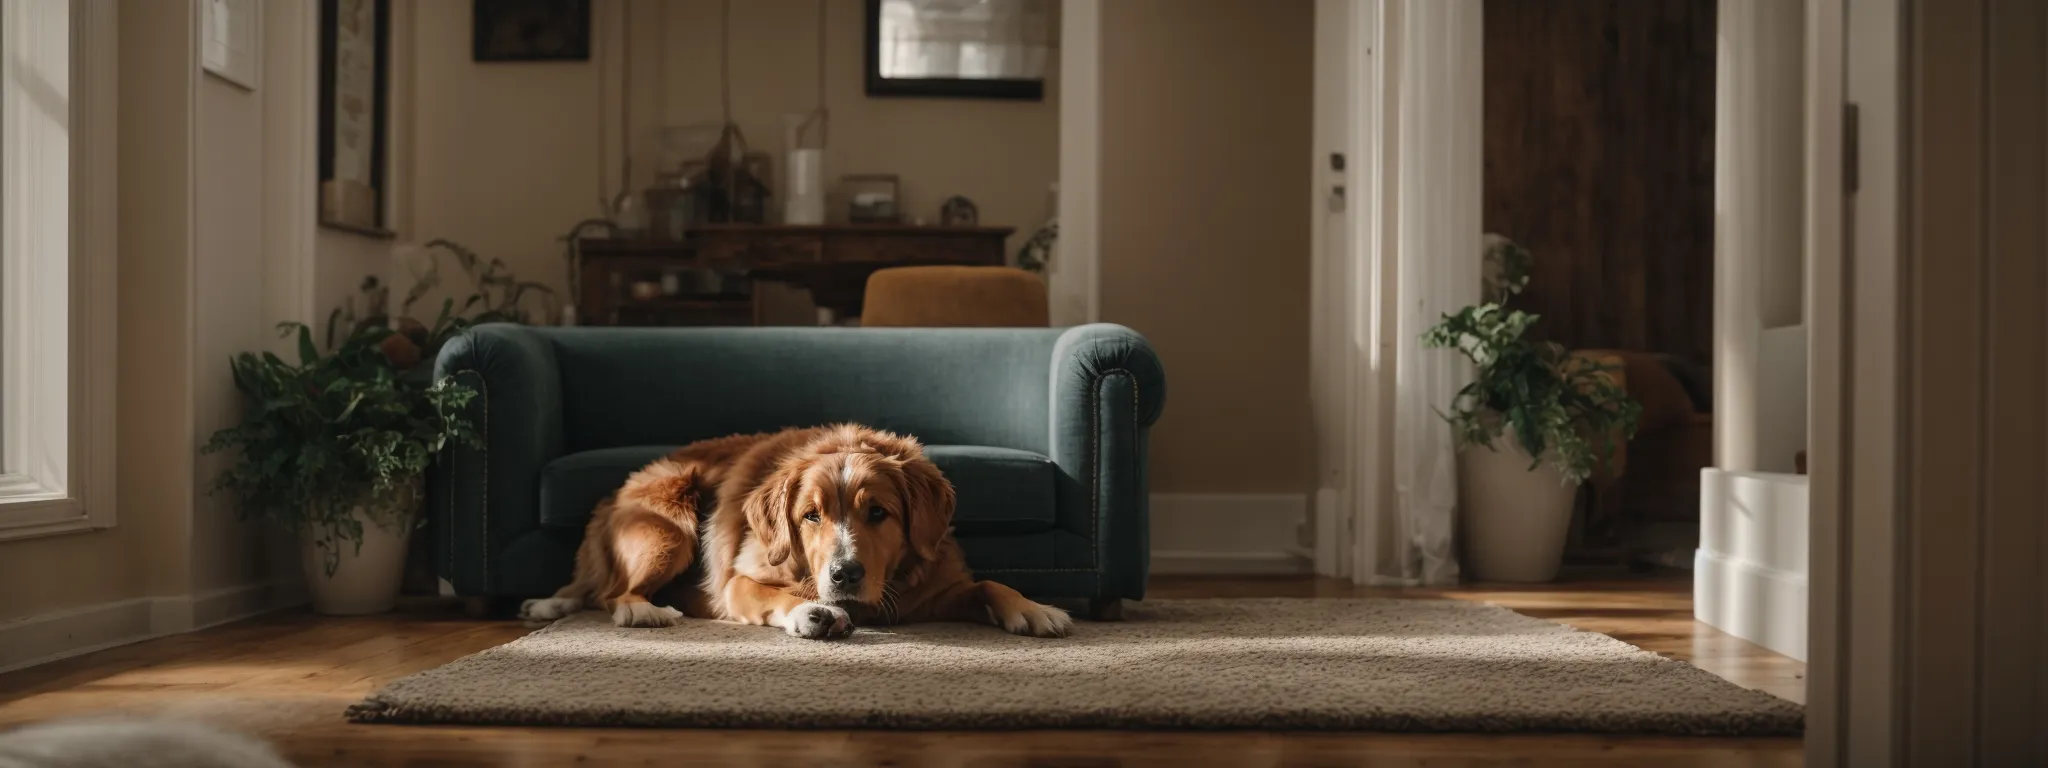 a pet dog rests peacefully in a cozy living room, unaware of the invisible dander it releases into the home's hvac system.